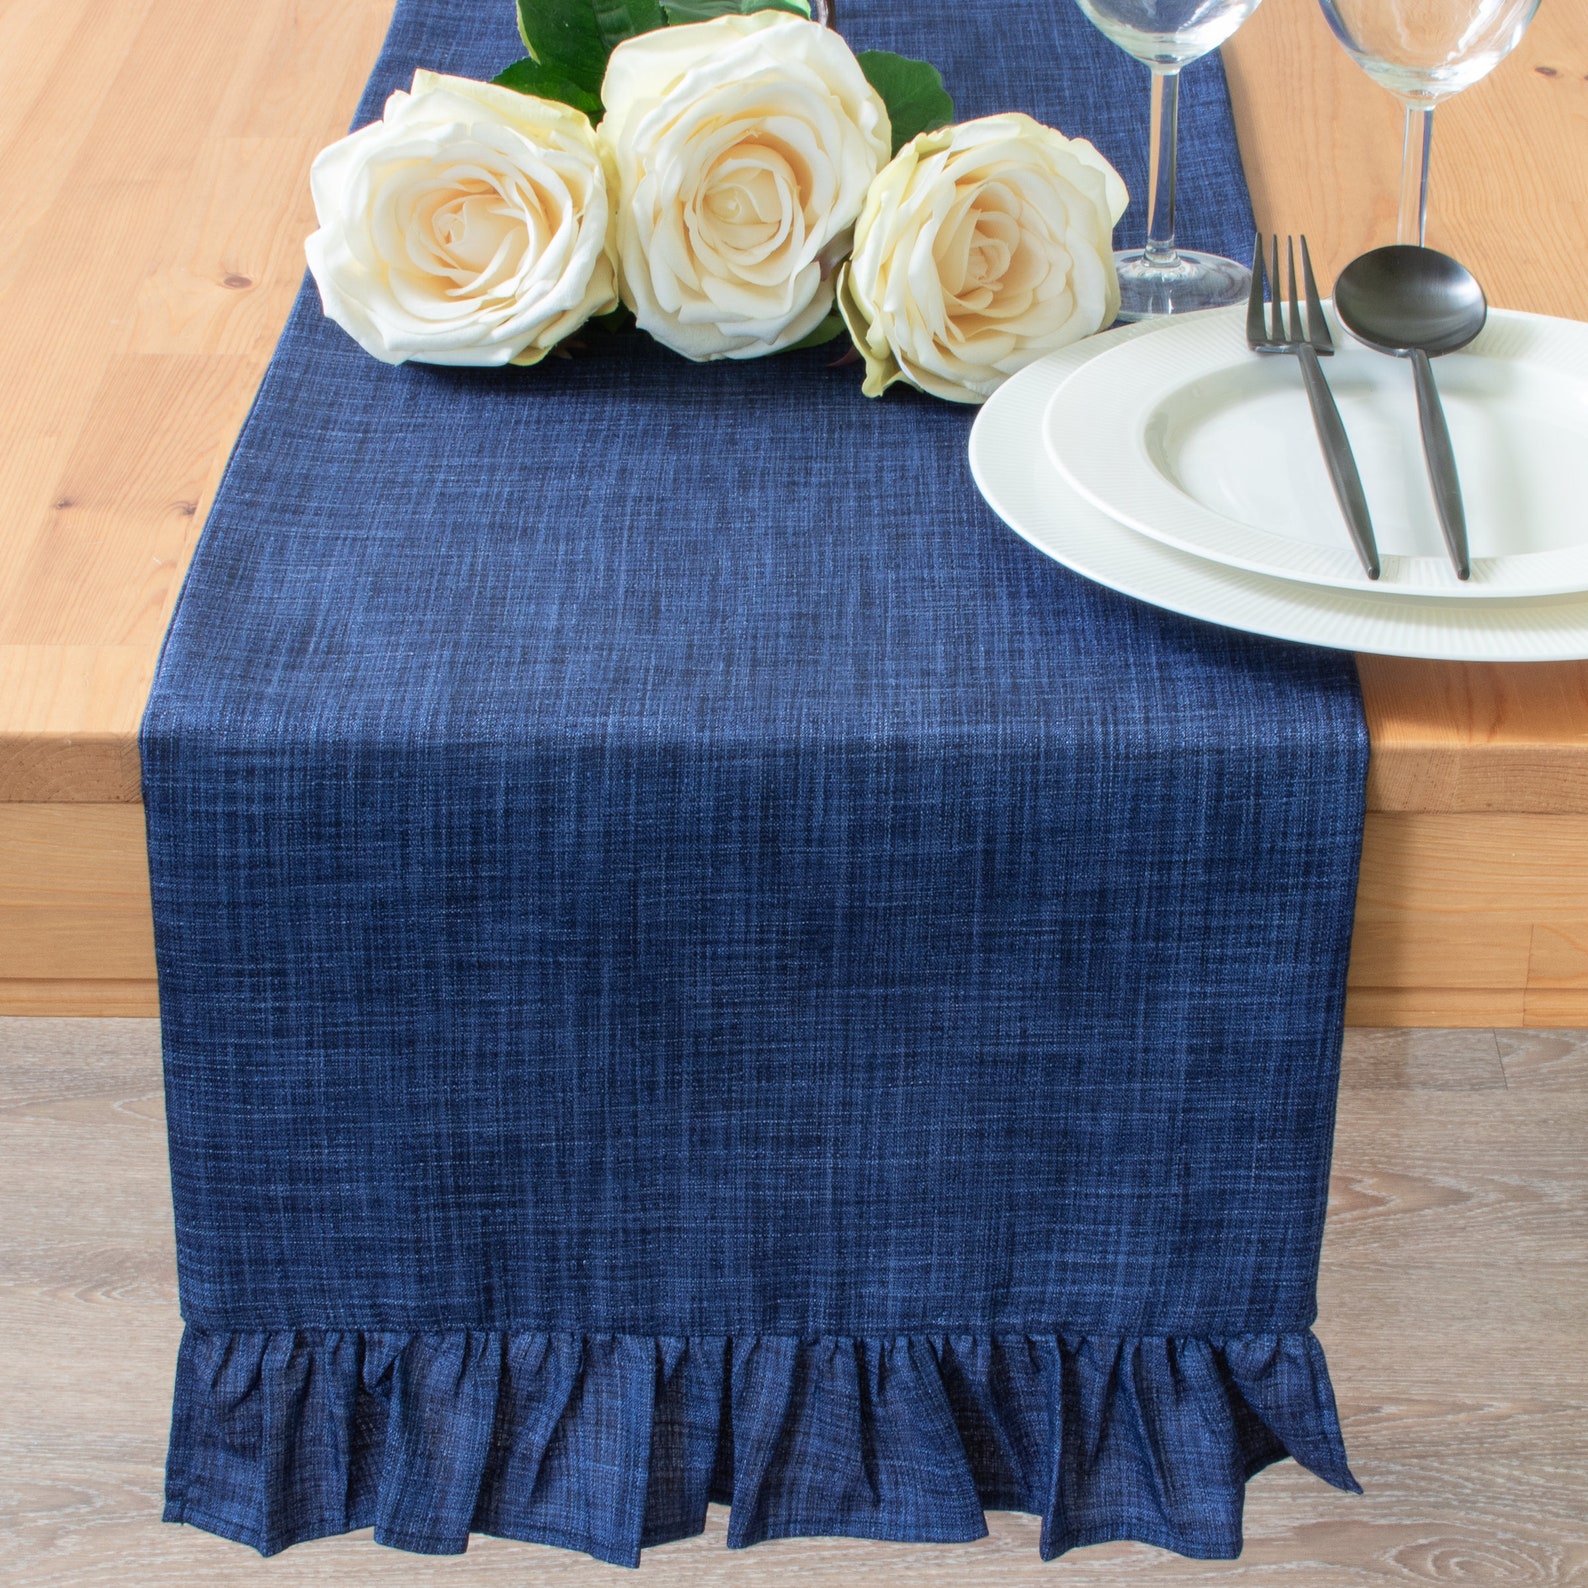 extra long table runners